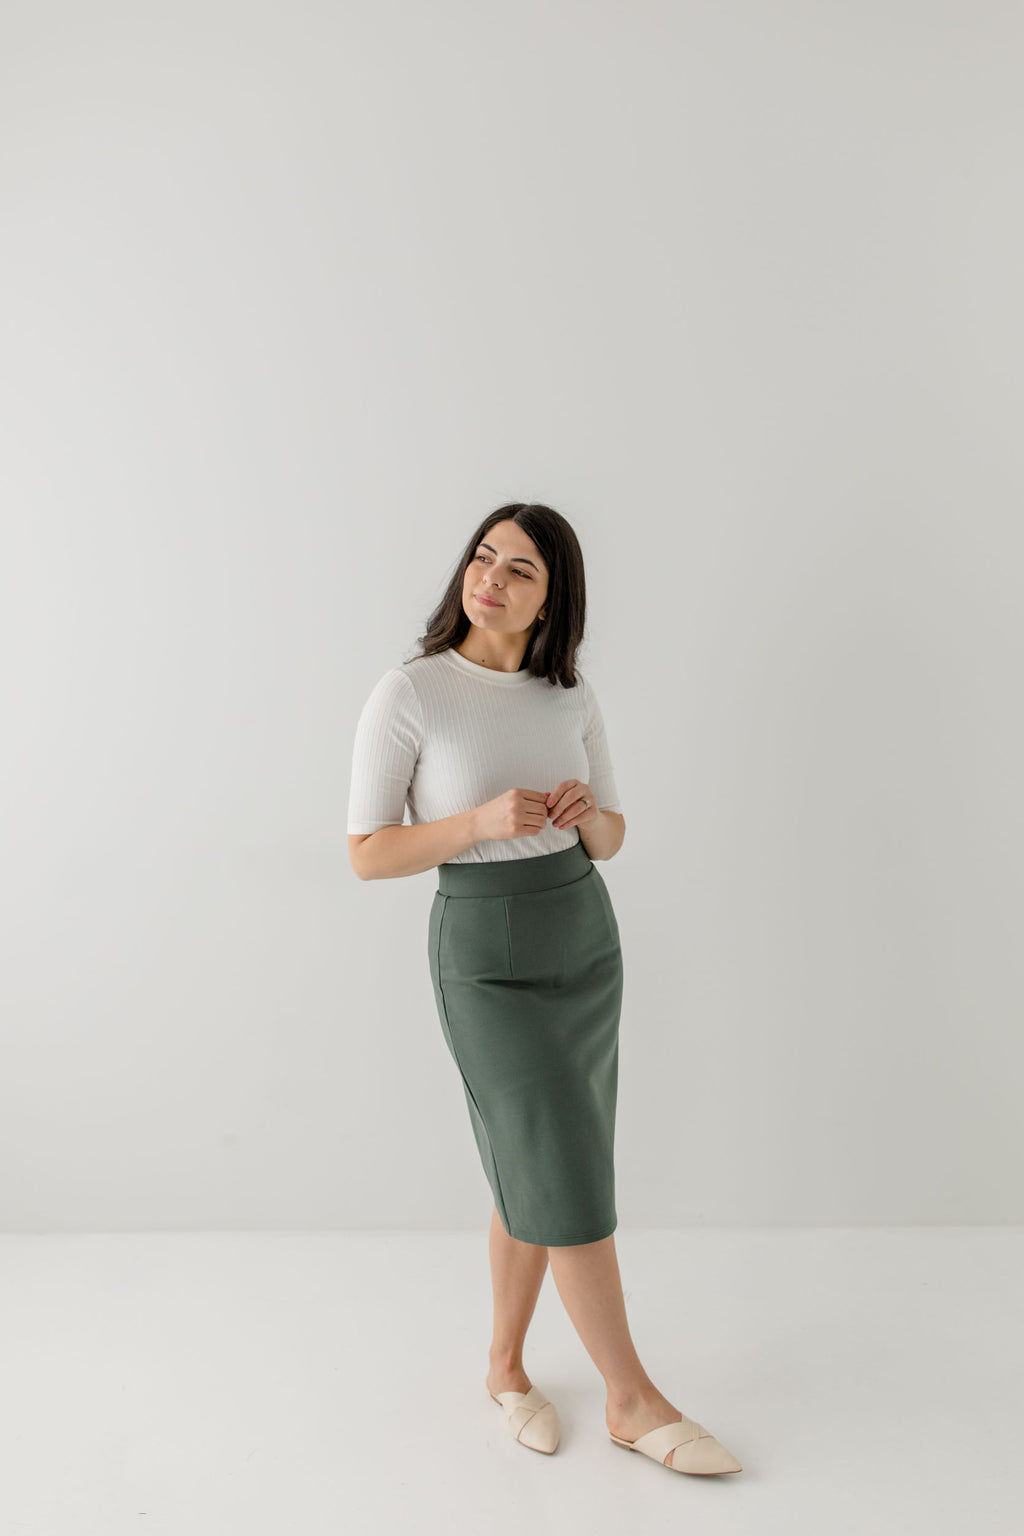 Anna' Pencil Skirt in Dusty Green FINAL SALE – The Main Street Exchange